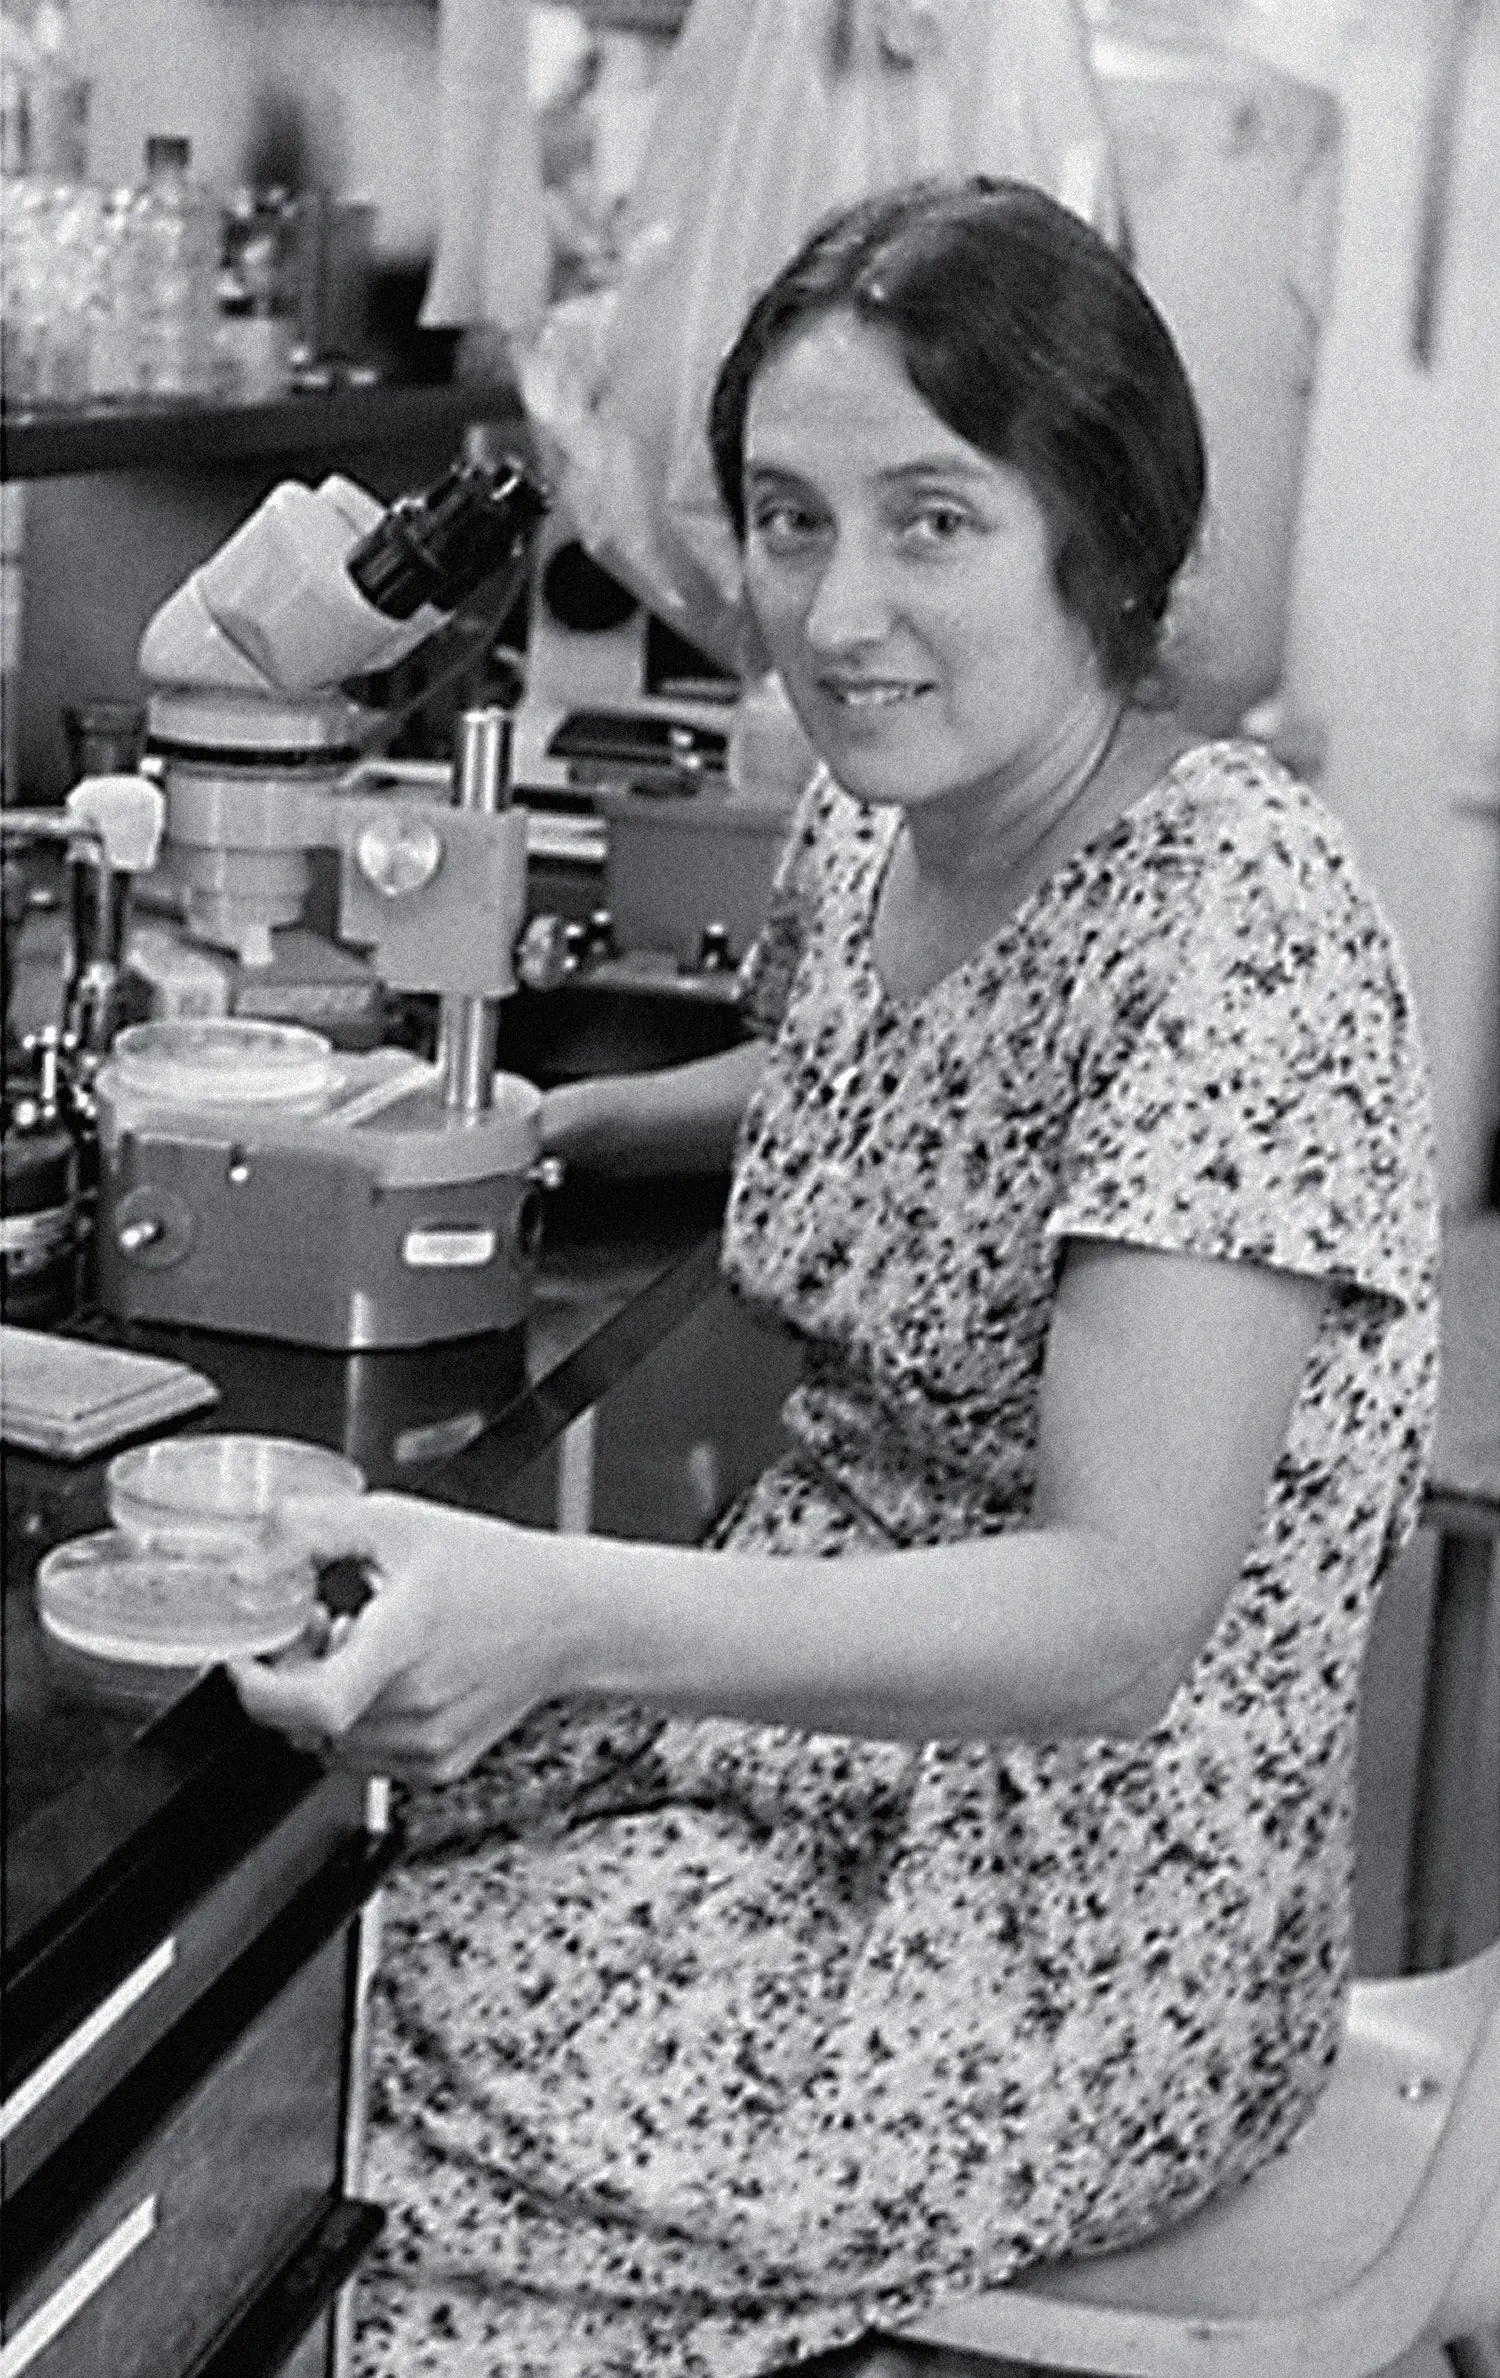 Portrait of Lynn Margulis at work in her laboratory, seated in front of a microscope.